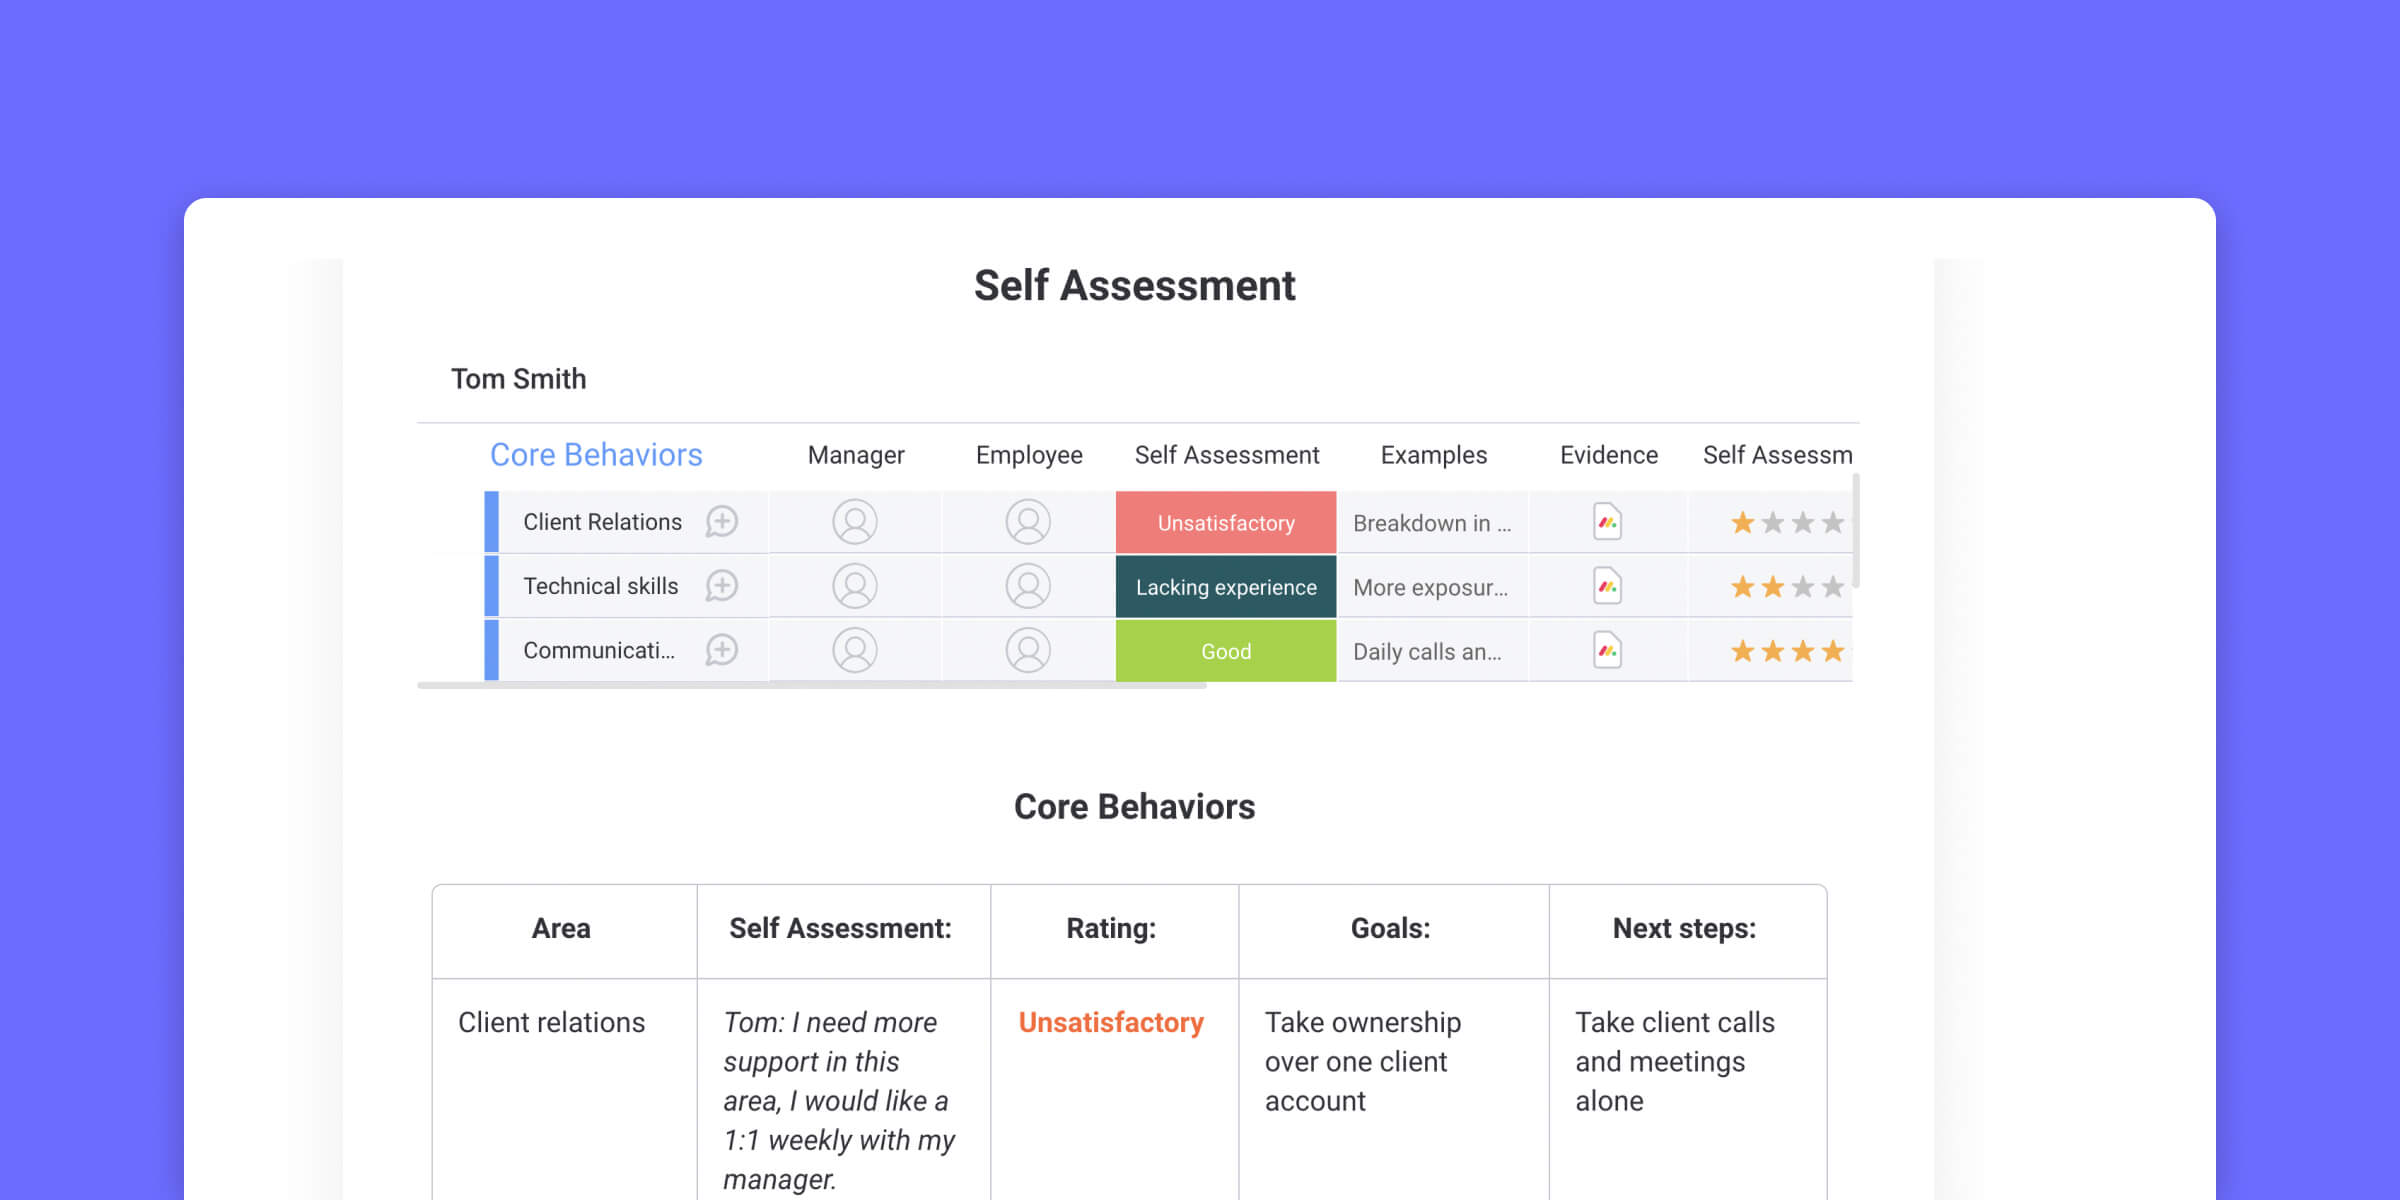 Use This Self-Assessment Template to Engage Your Workforce | monday.com Blog